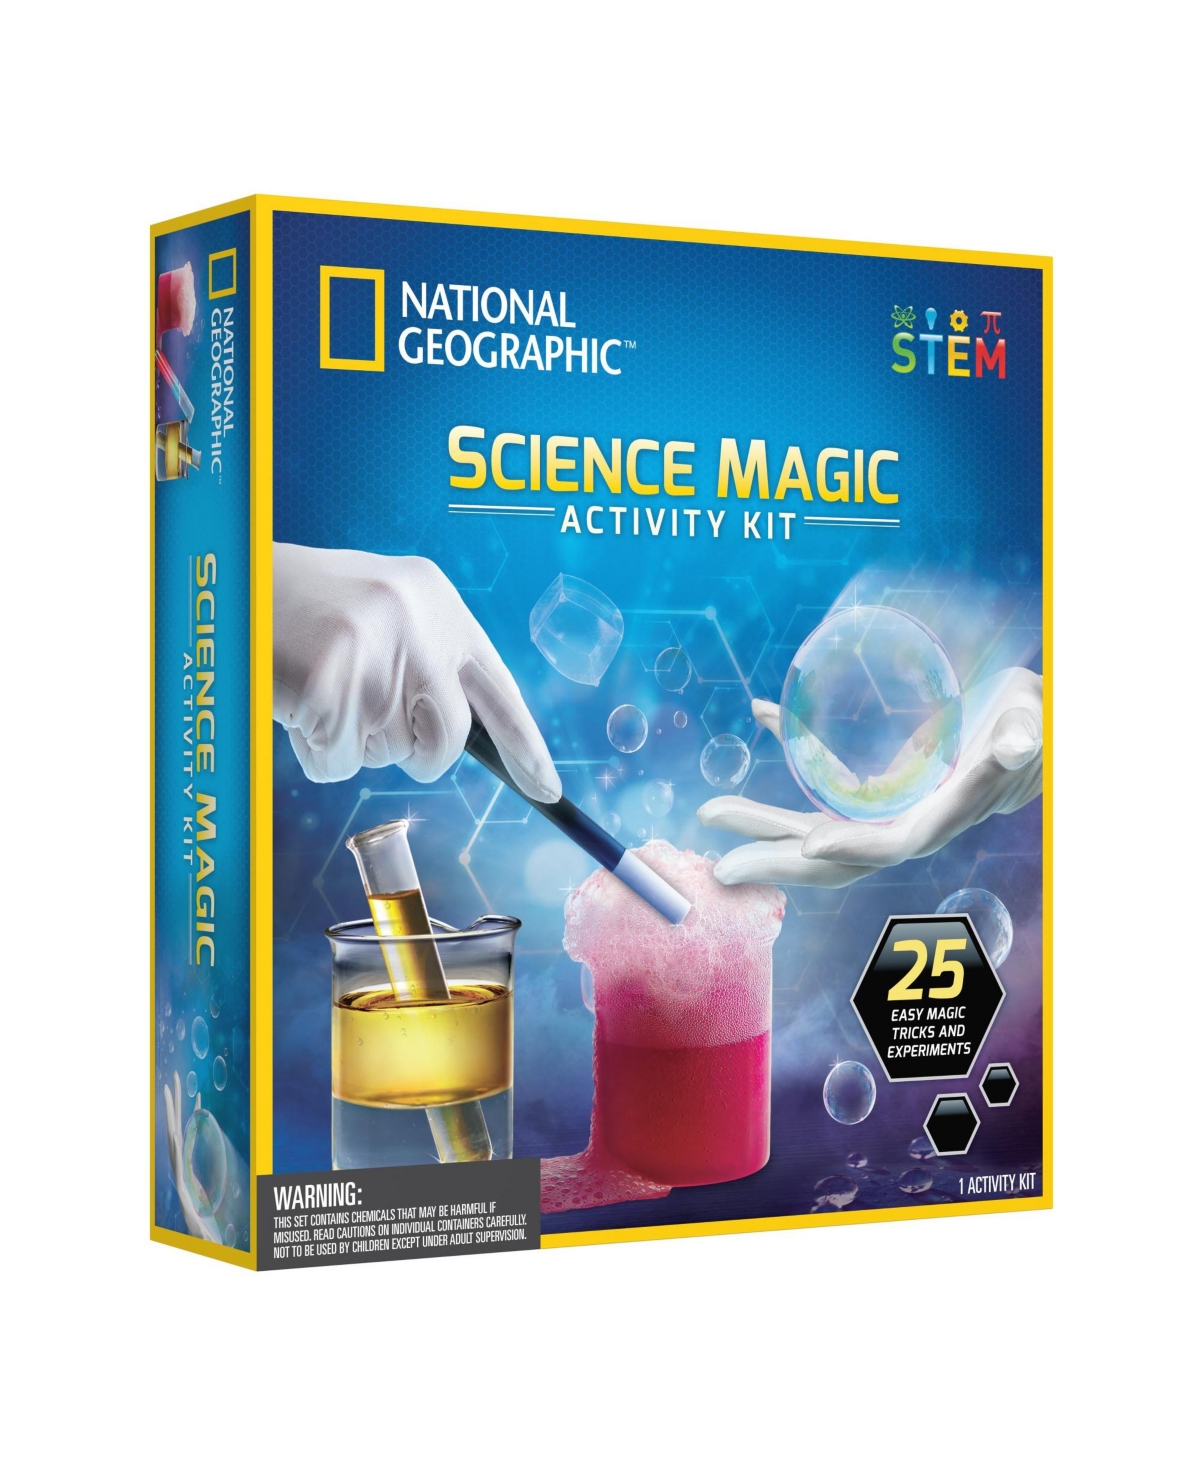 National Geographic Science Magic Activity Kit In N,a